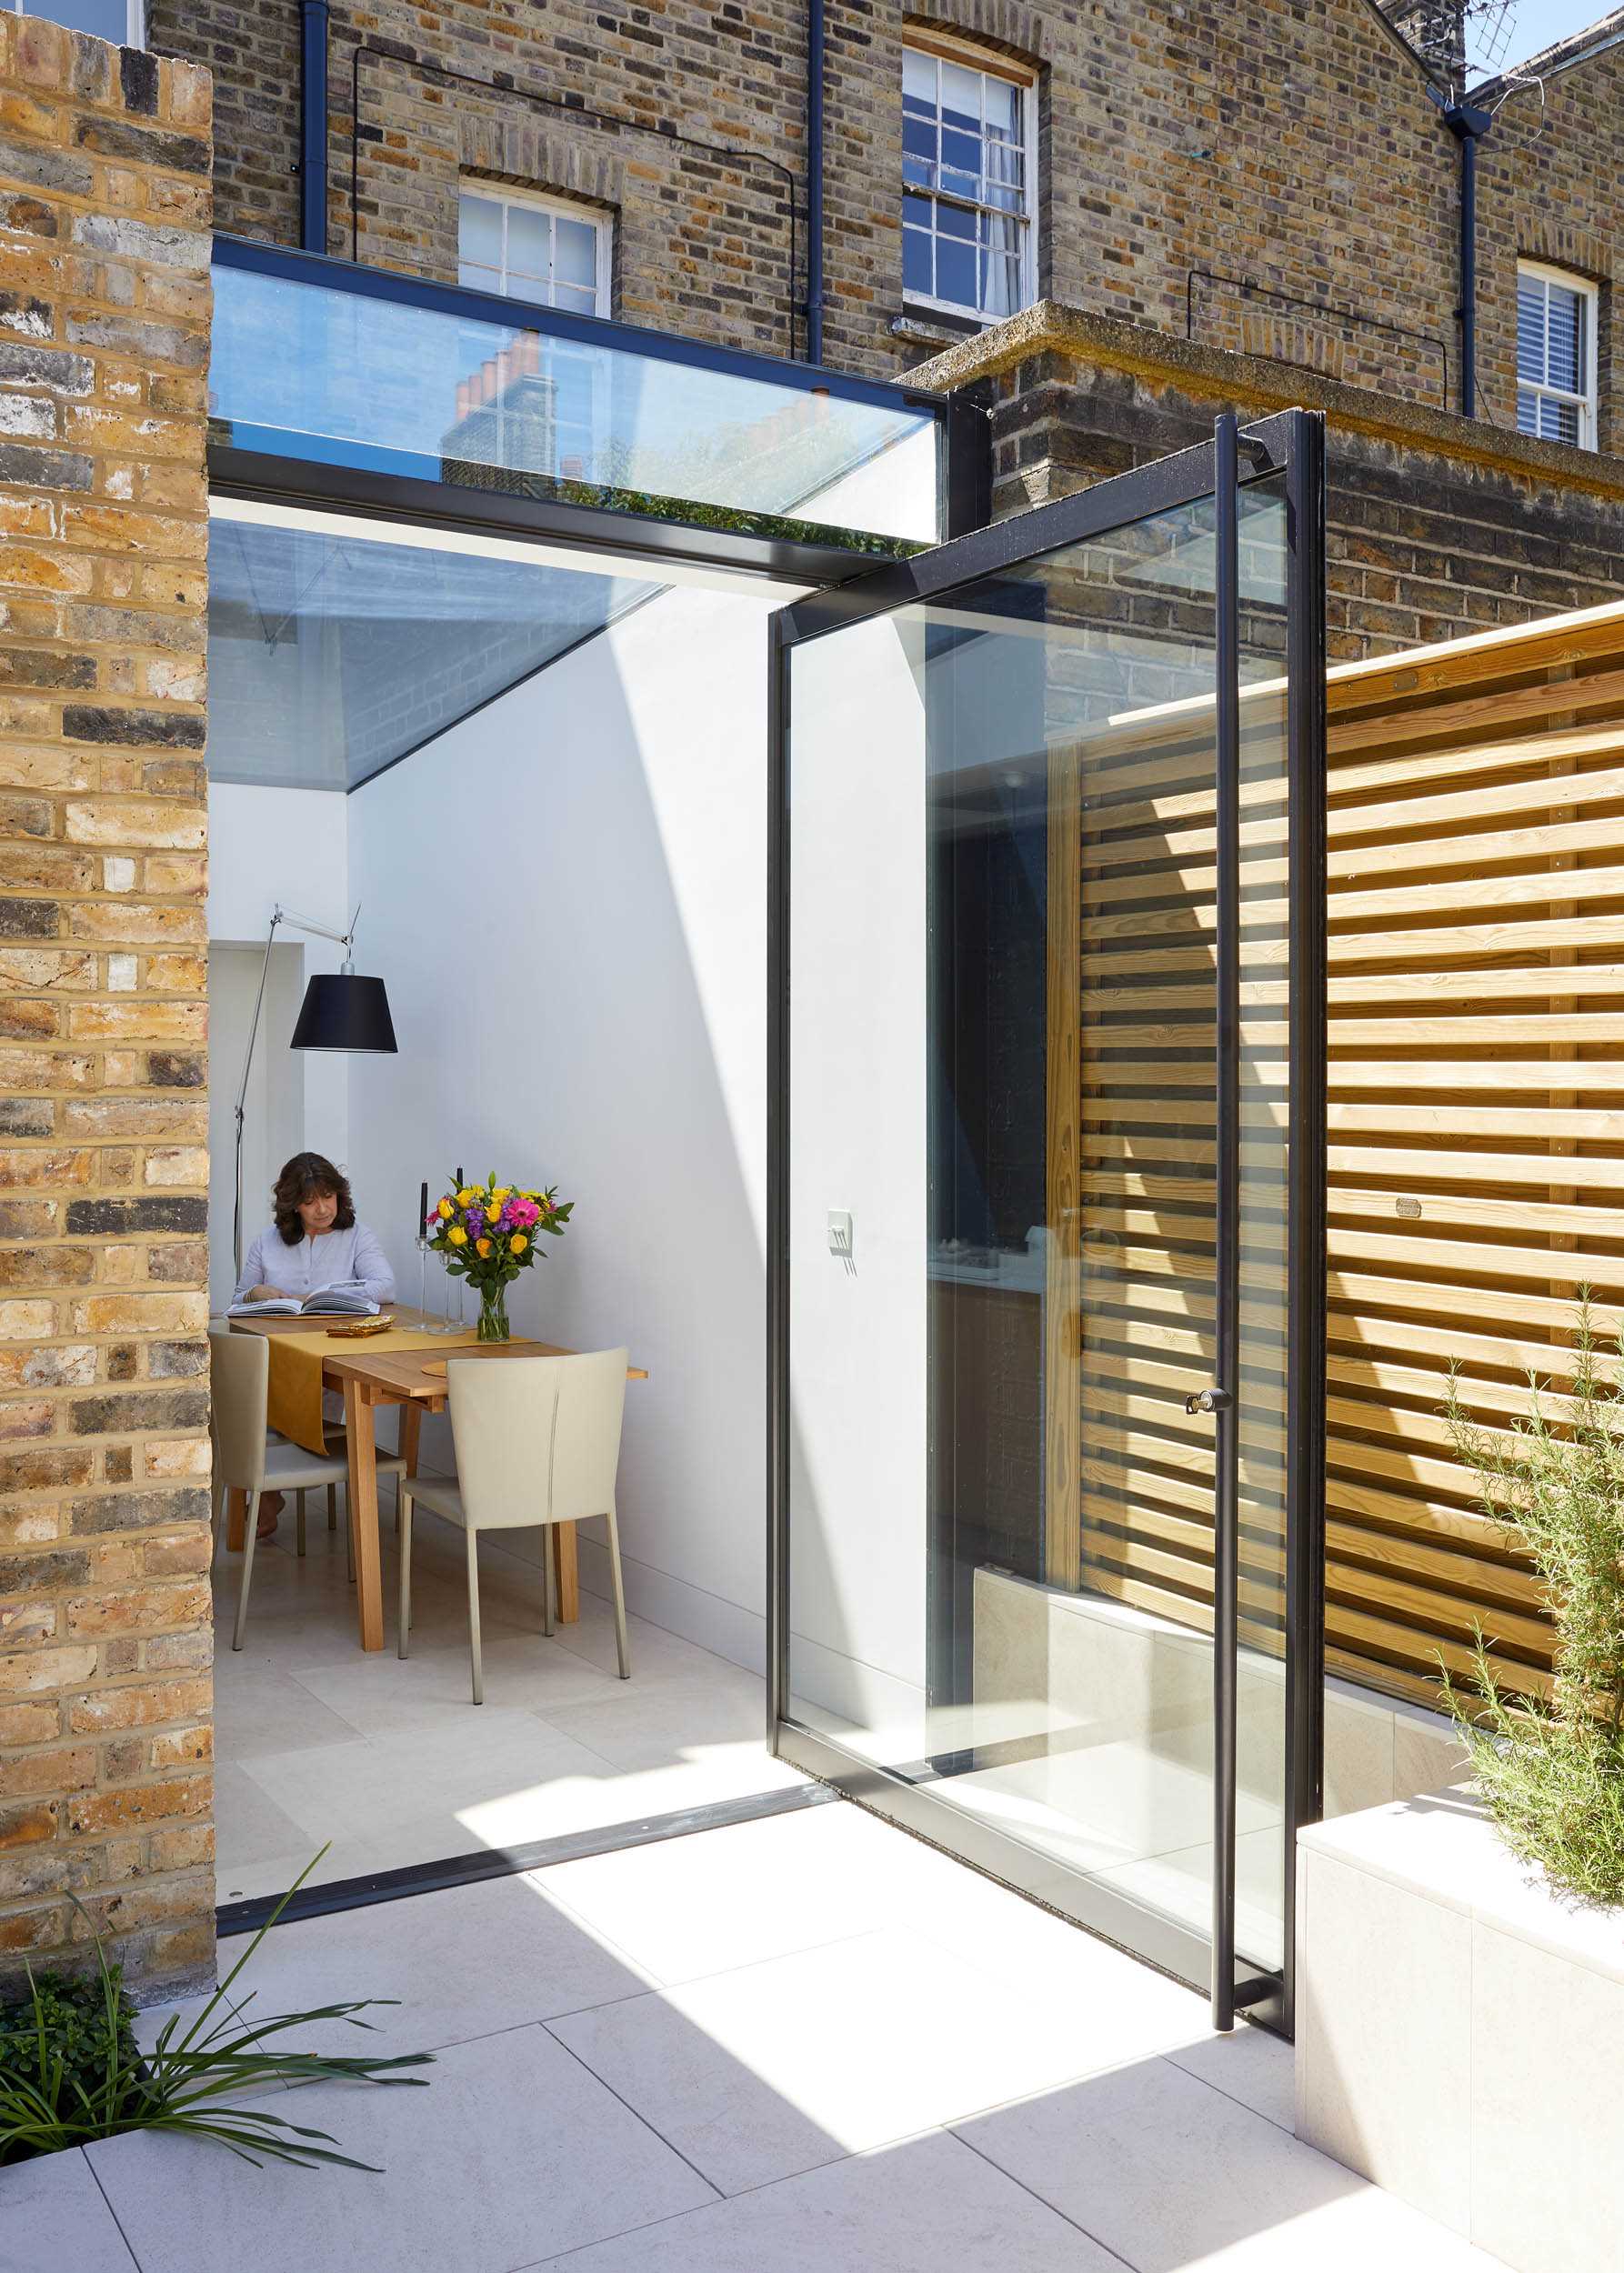 A large pivoting glass door connects the rear addition to the patio, garden, and studio, and at the same time allows natural light inside the home.